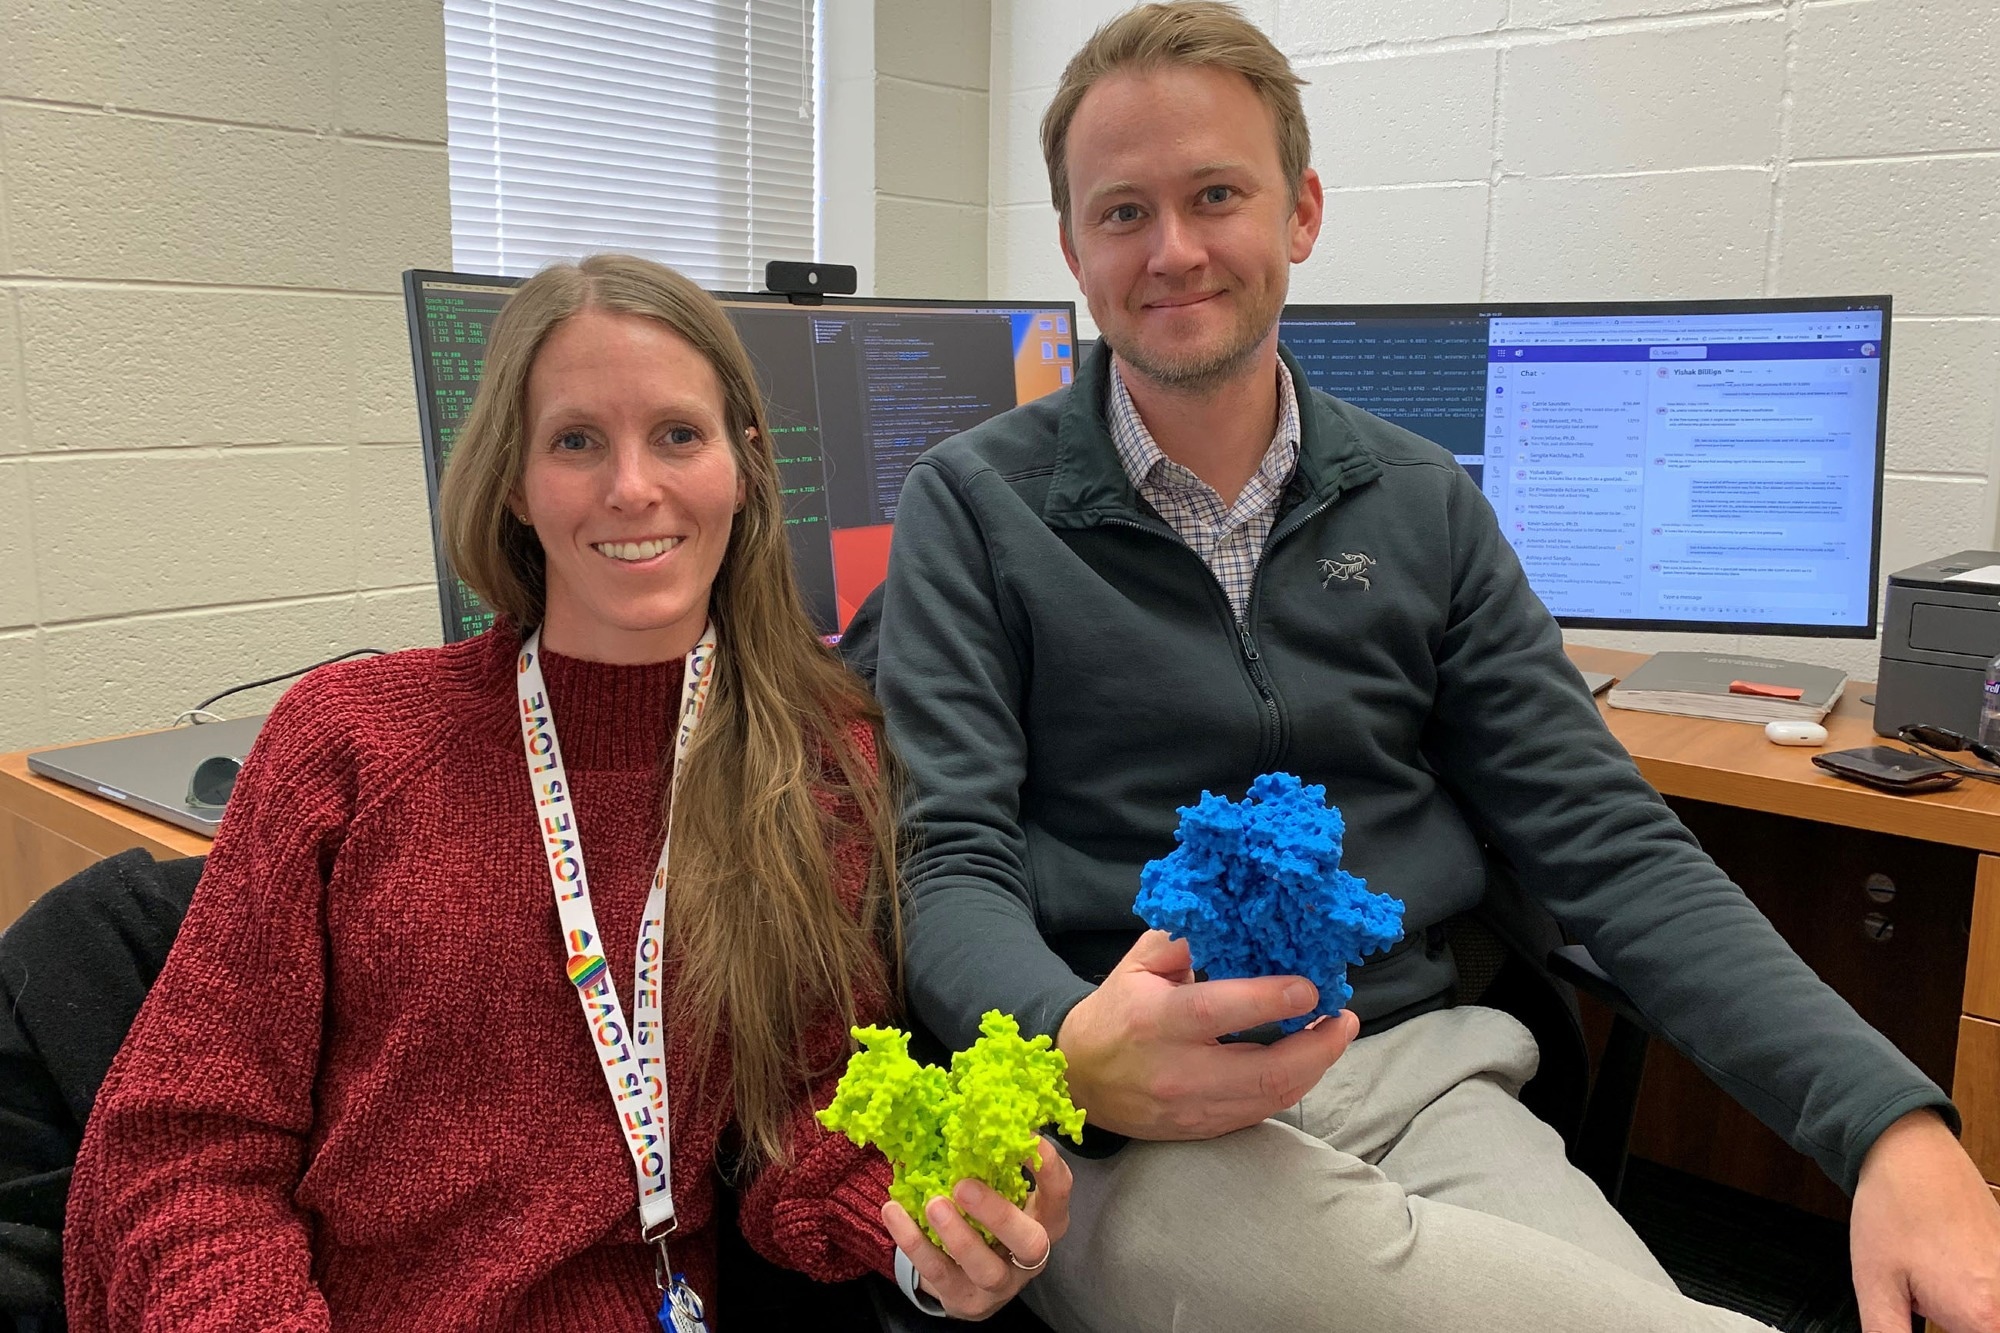 Postdoctoral researcher Ashley Bennett (left) and Associate Professor Rory Henderson of the Duke Human Vaccine Institute with 3D printed models of the molecules they study on the HIV virus